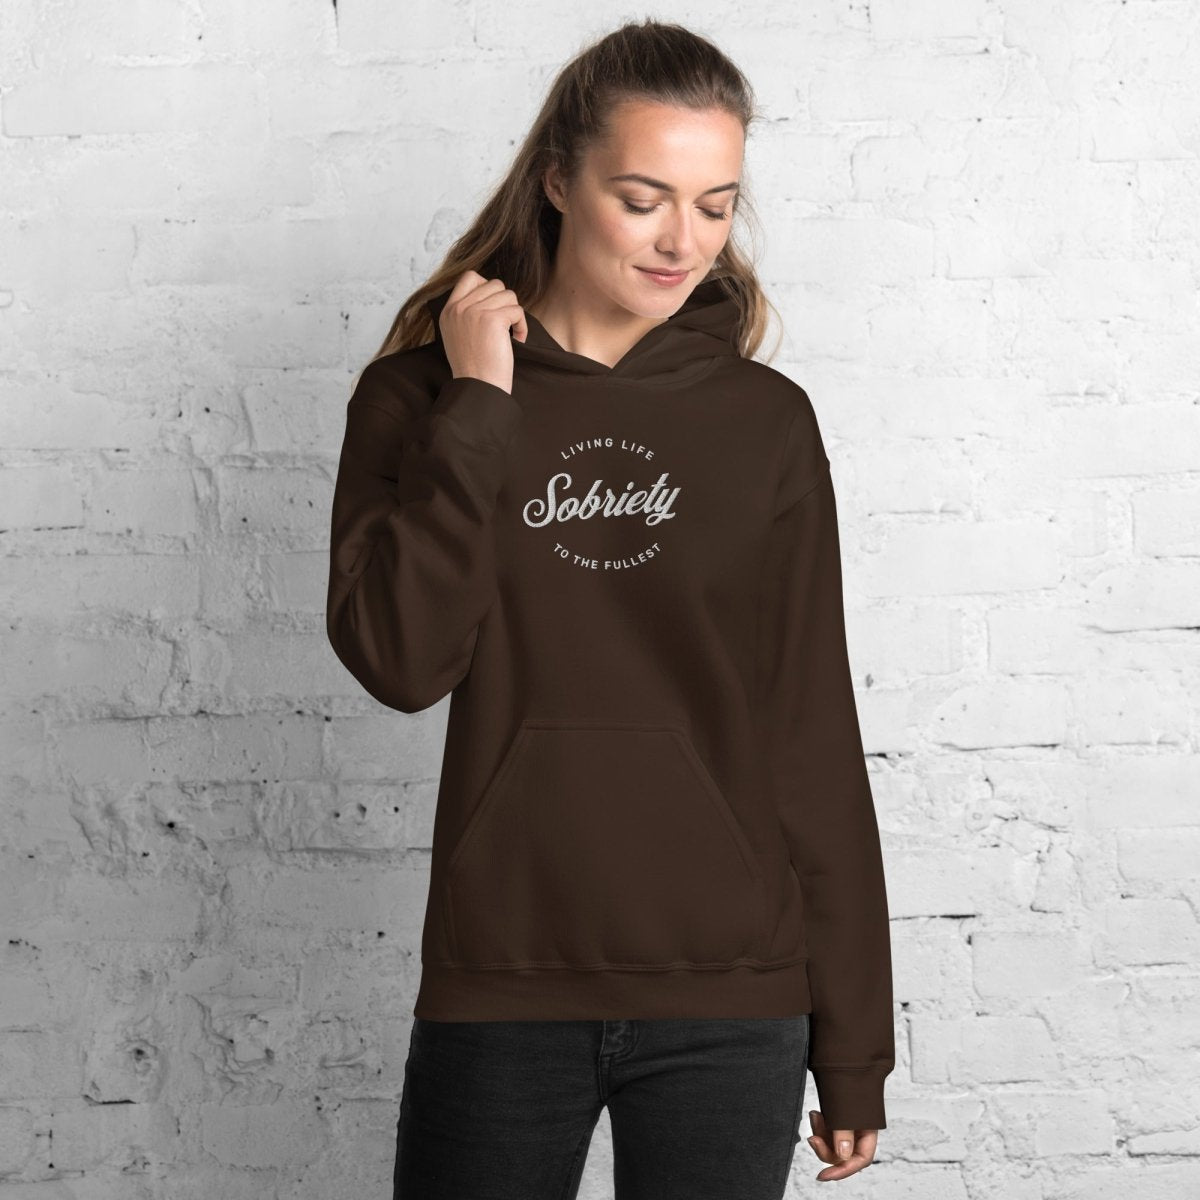 Sobriety, Living Lift To The Fullest - Embroidered Unisex Hoodie - Sobervation